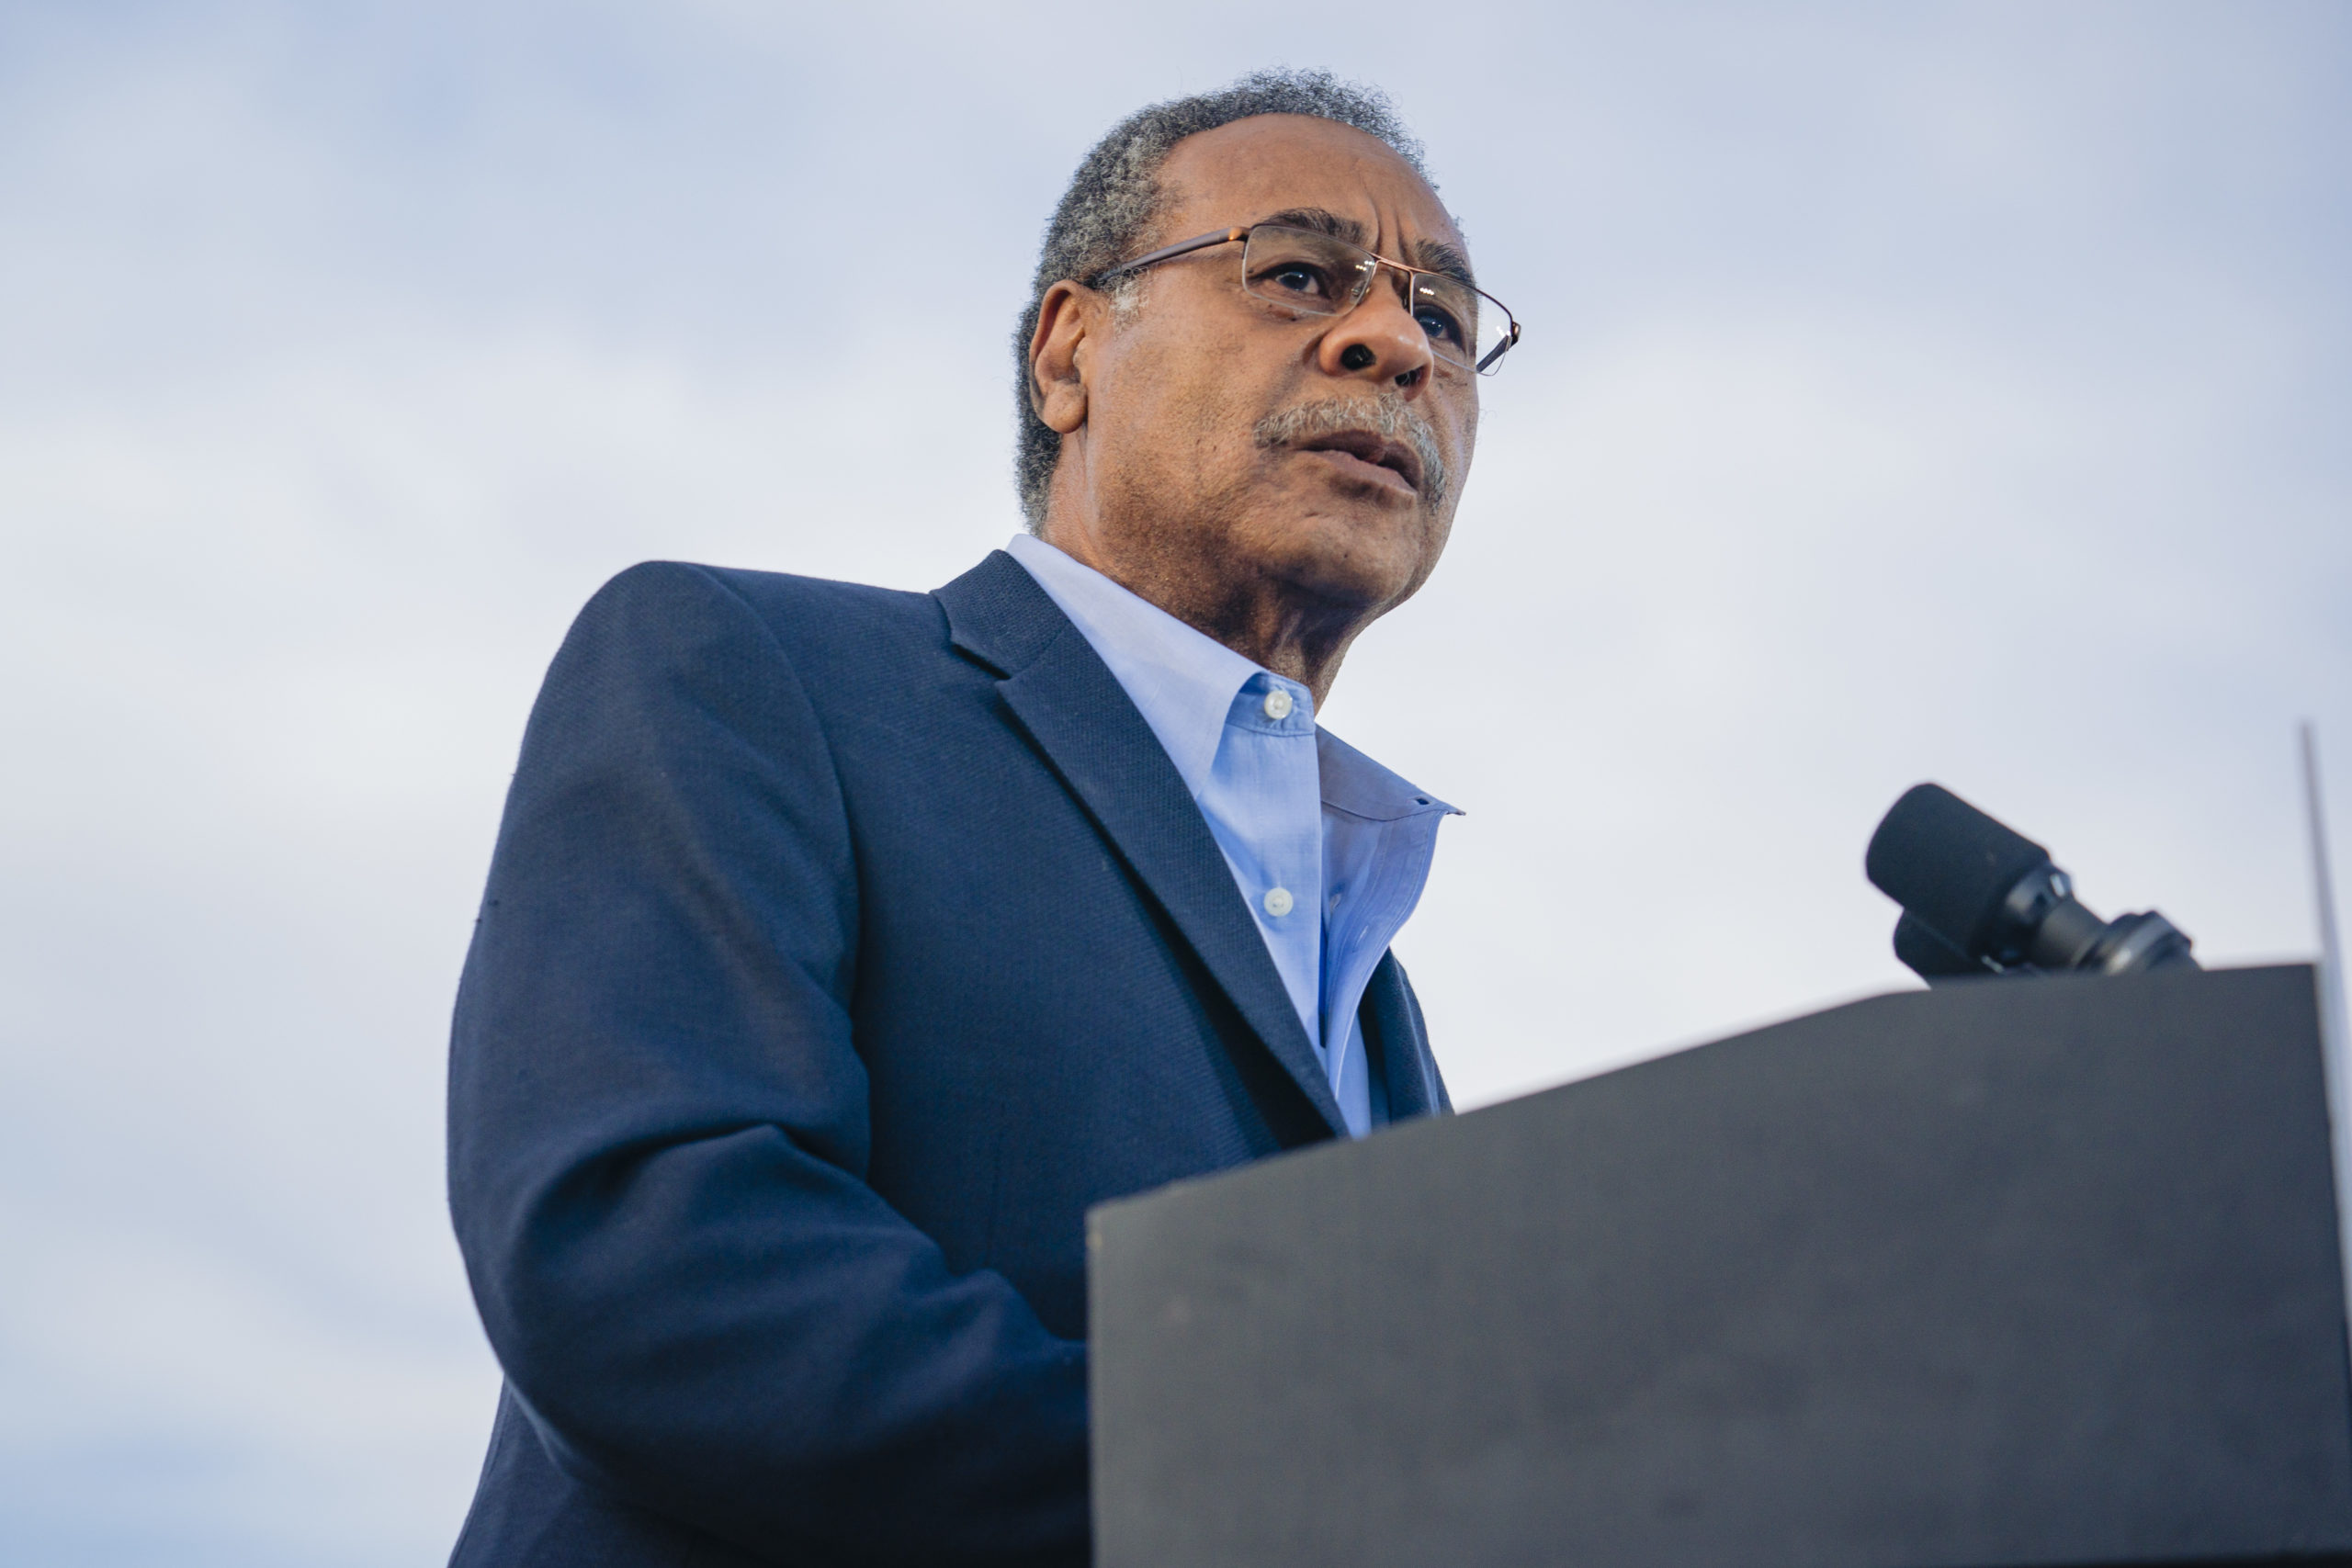 What is the meaning of "awomen"? Rep Emanuel Cleaver ends congress prayer in baffling way